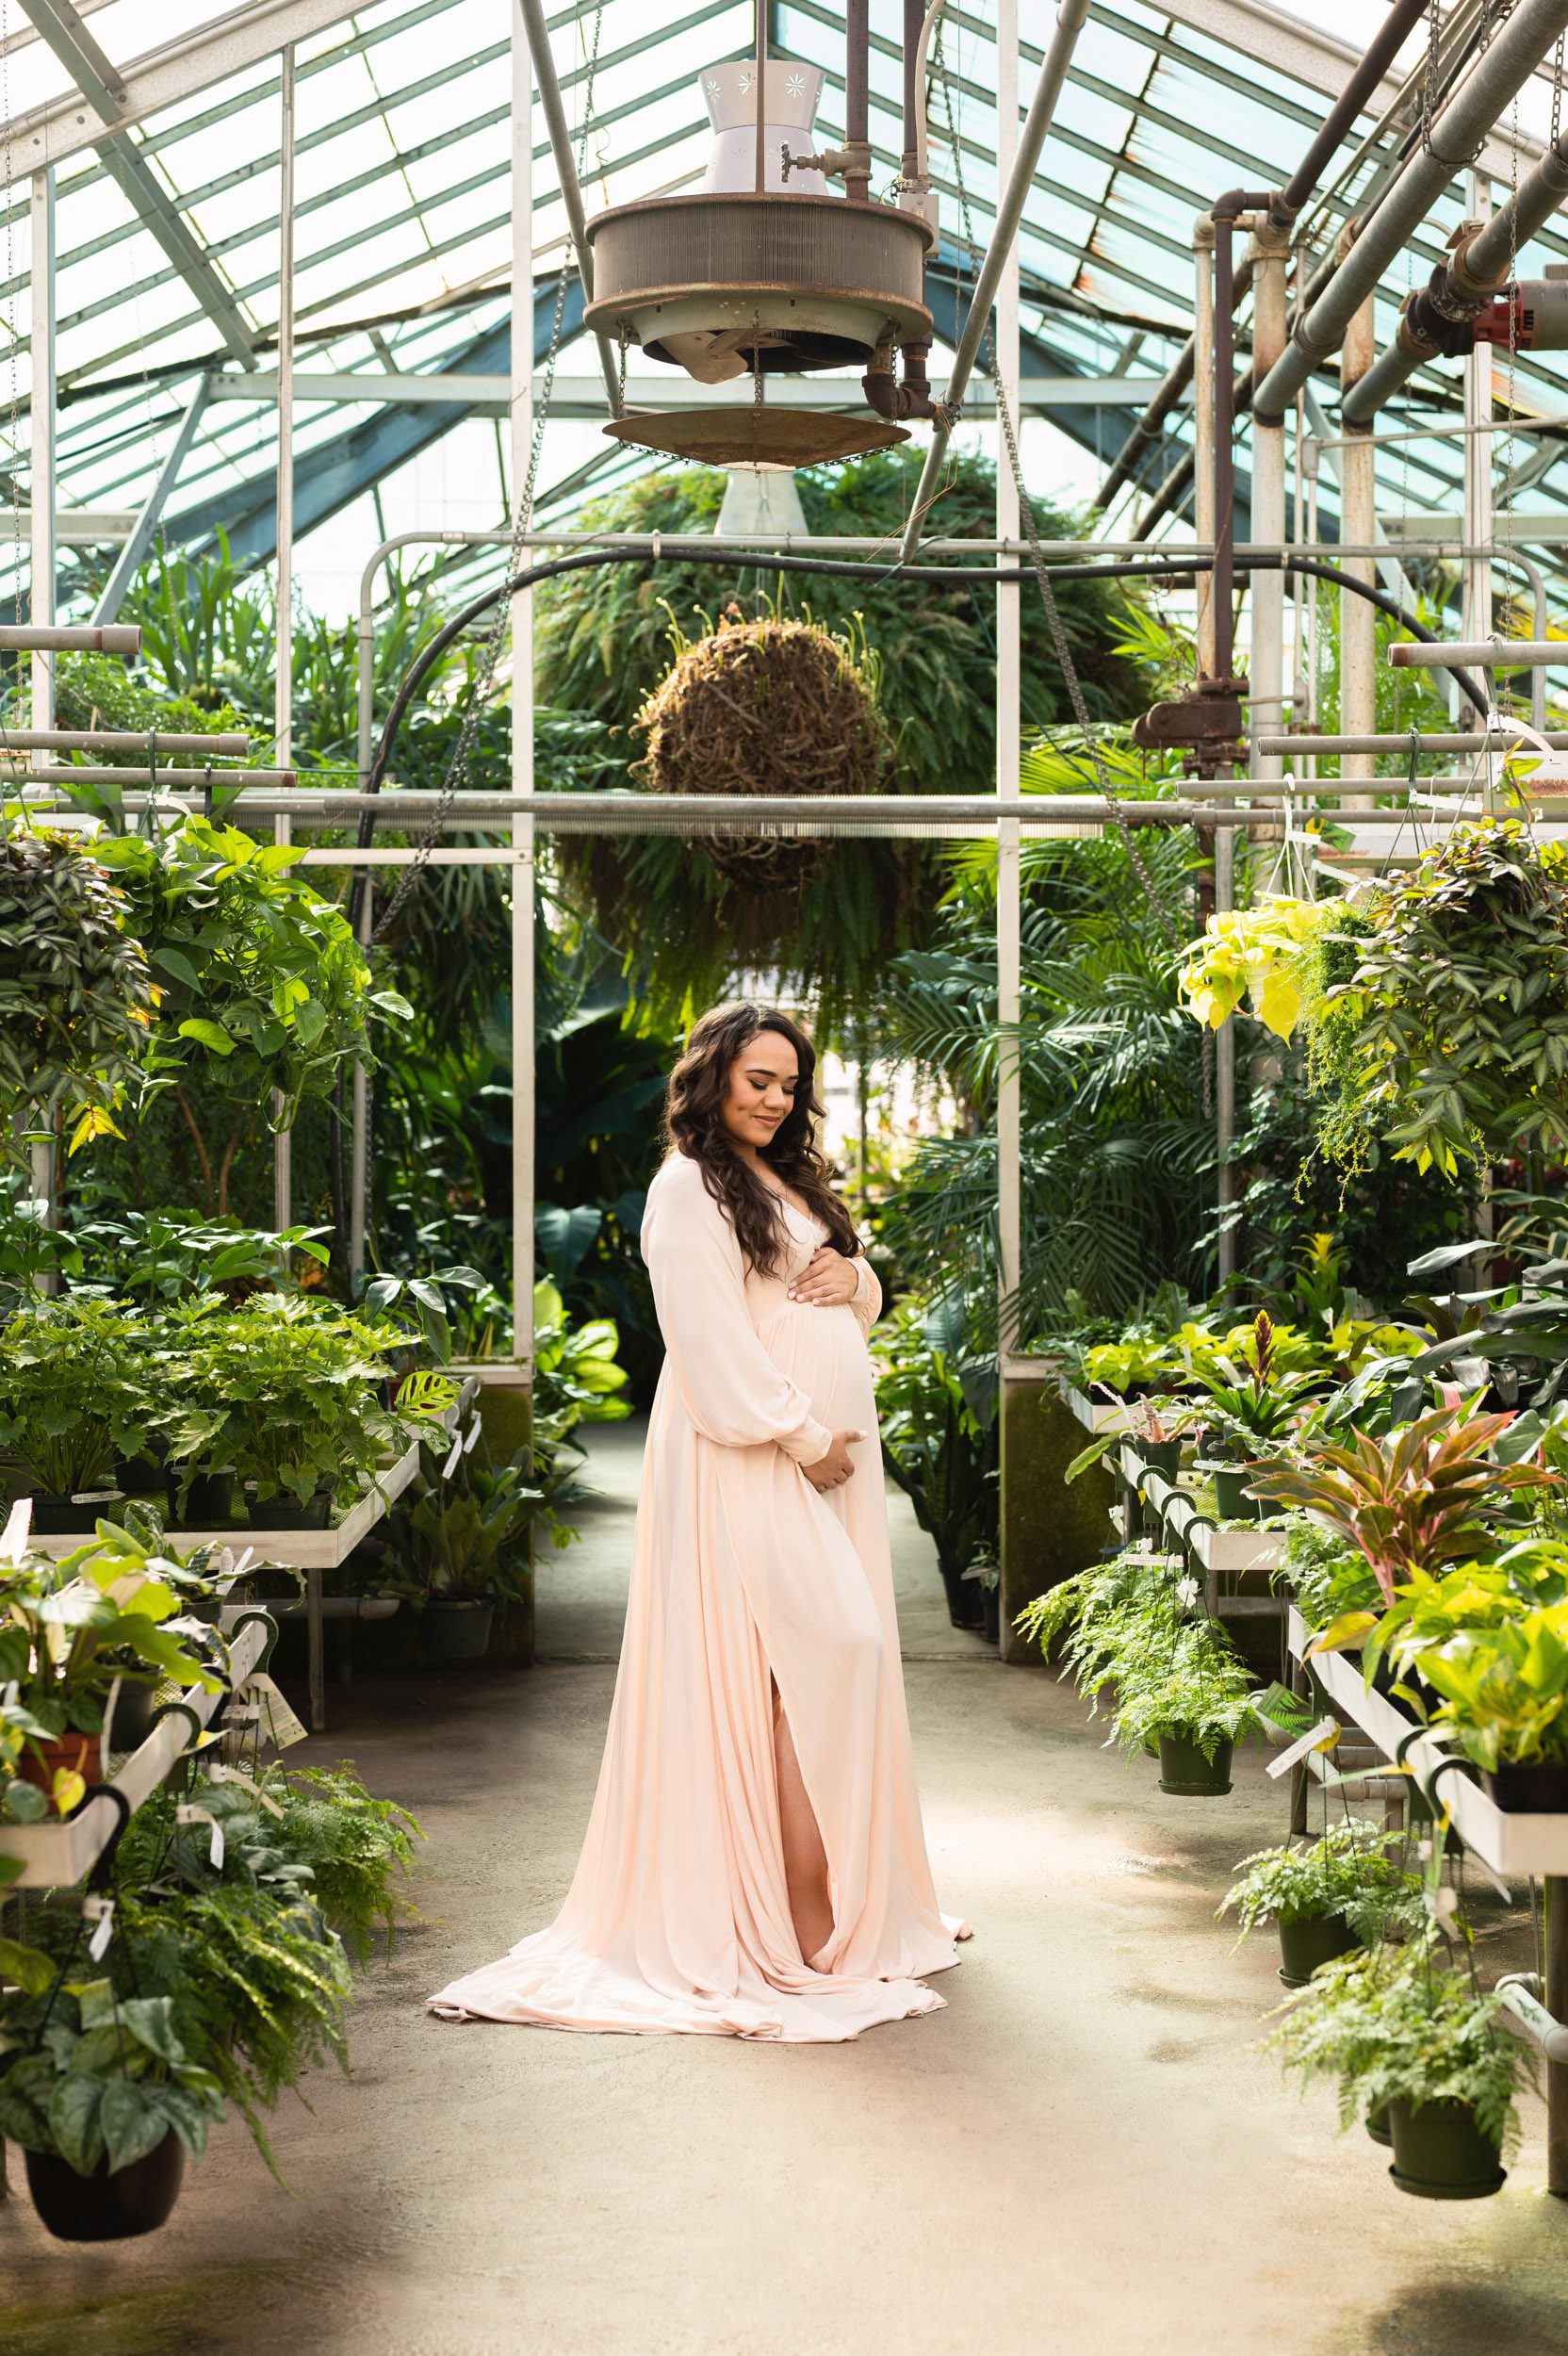 an expecting mom wearing a light pink dress standing in a greenhouse and smiling down at her belly during a maternity phootshoot